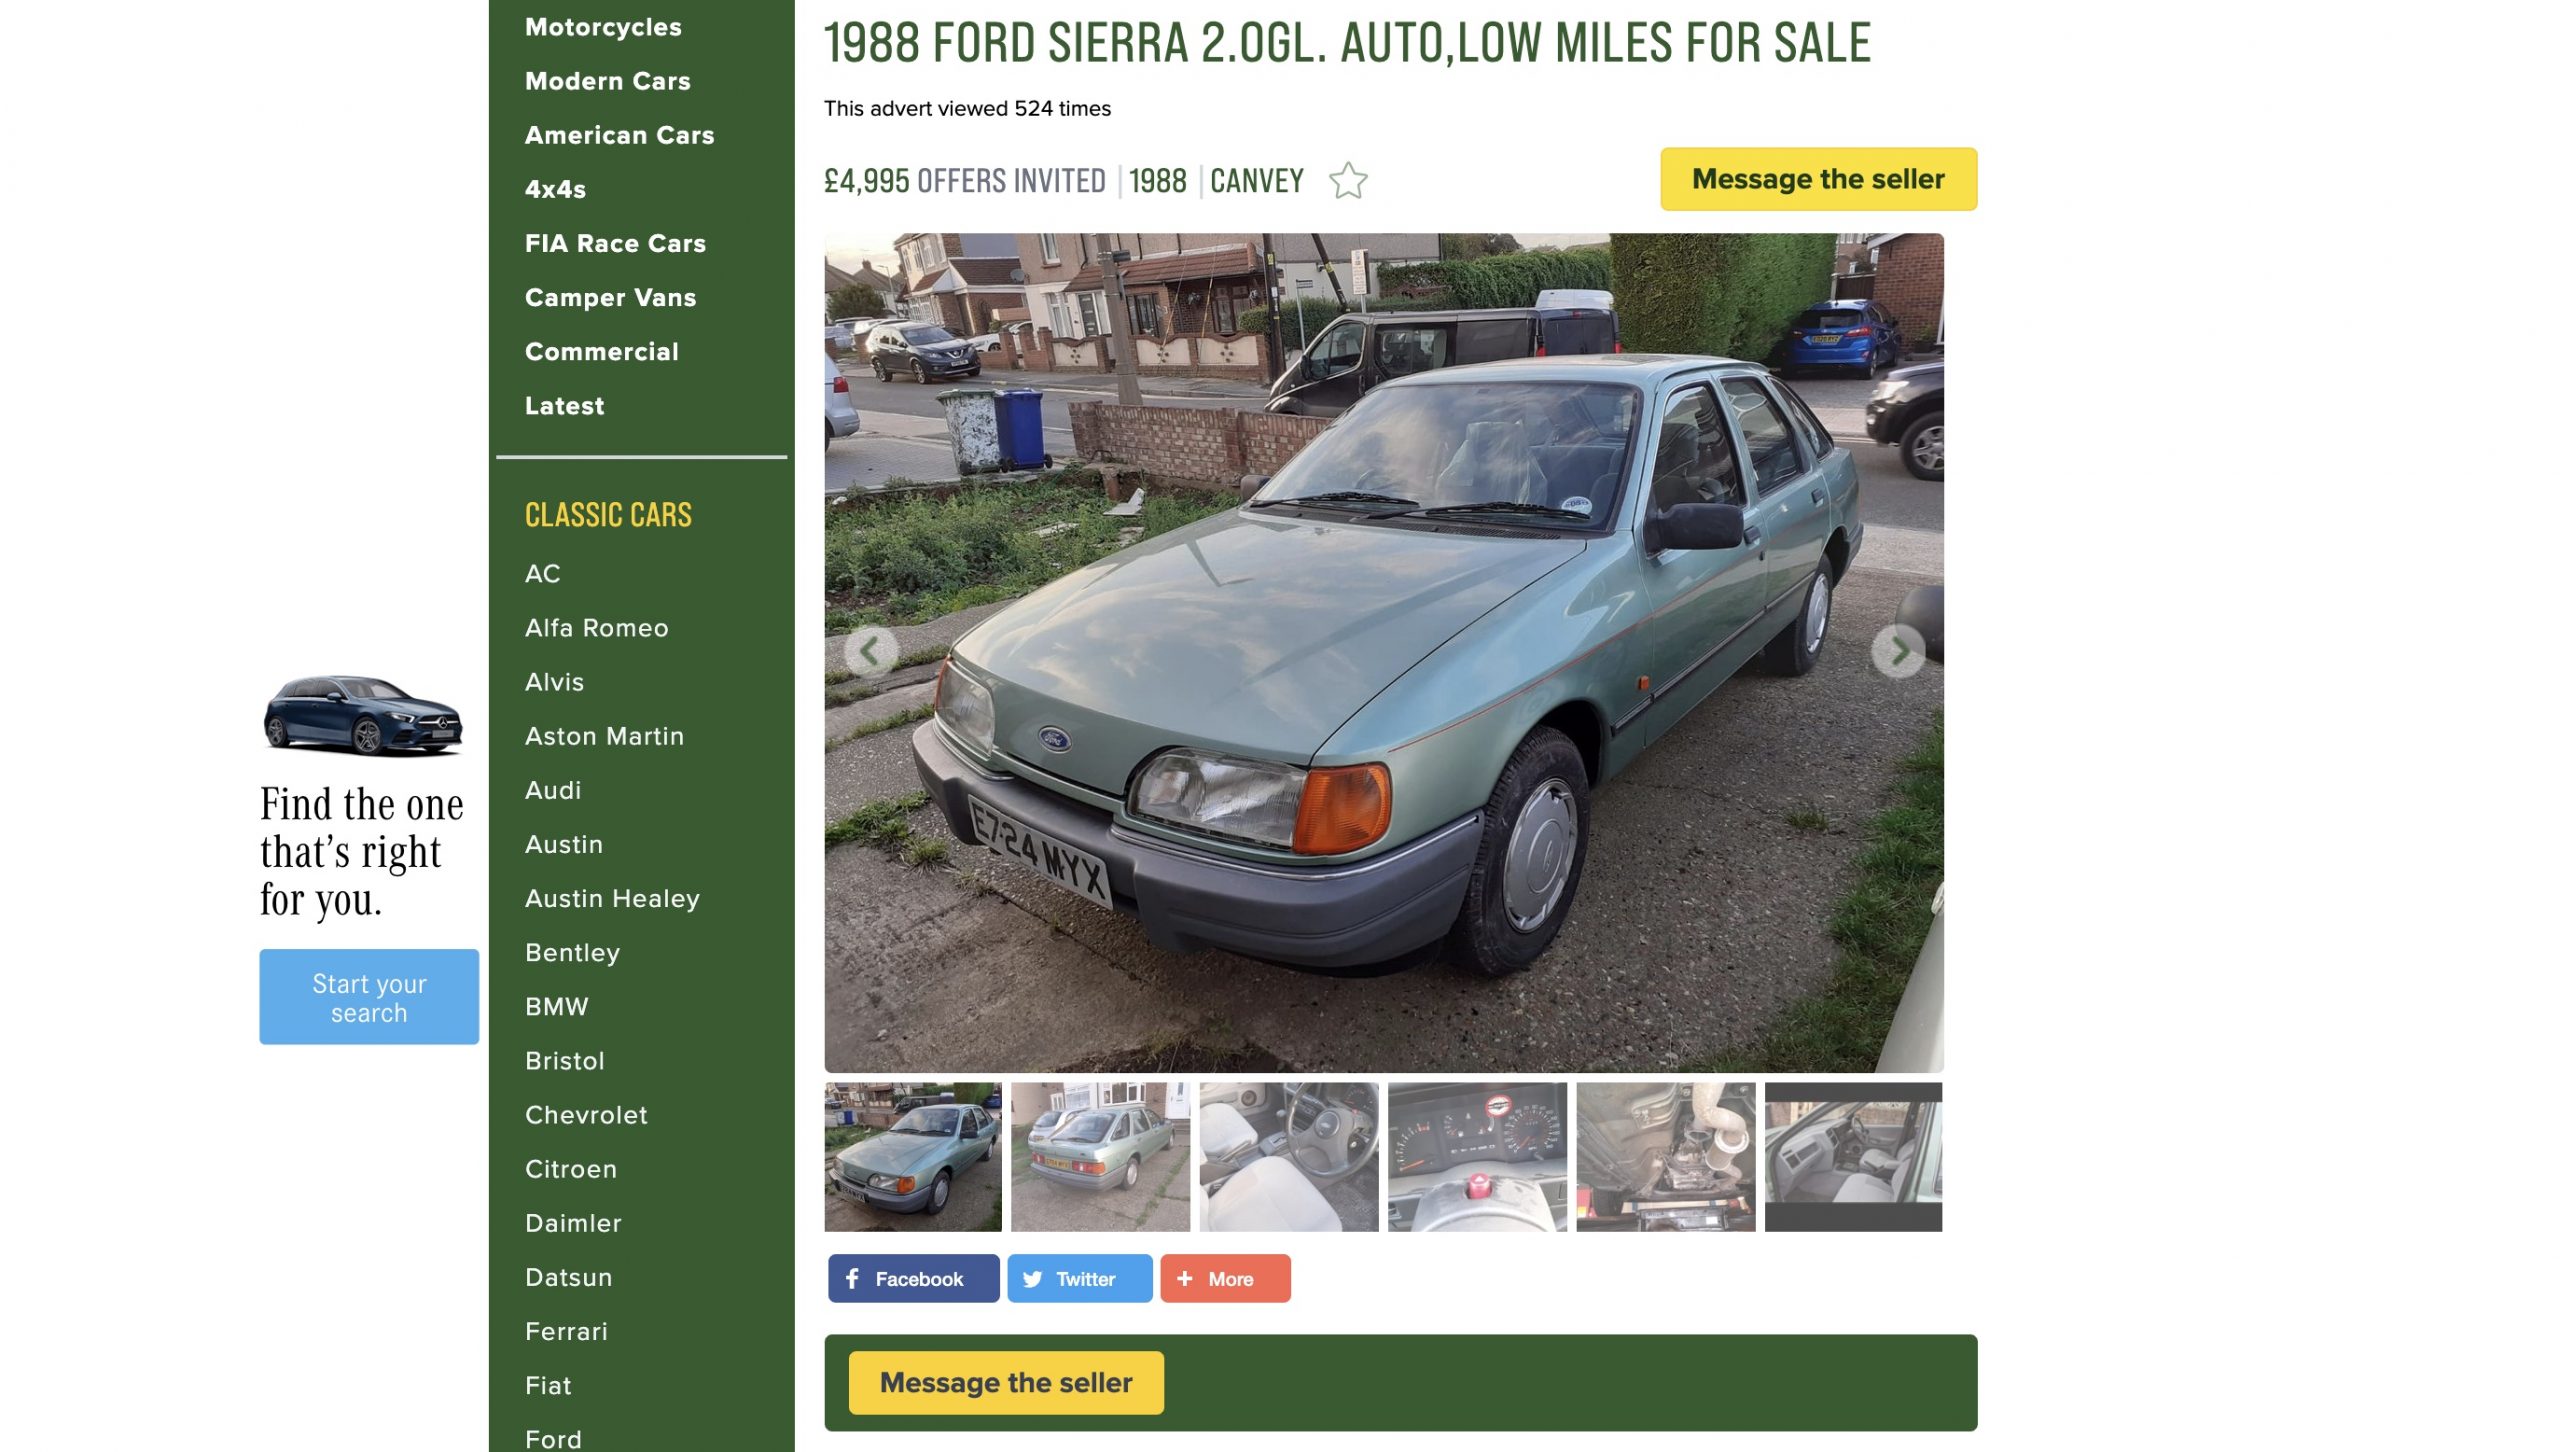 Unexceptional Classifieds: Ford Sierra 2.0GL automatic